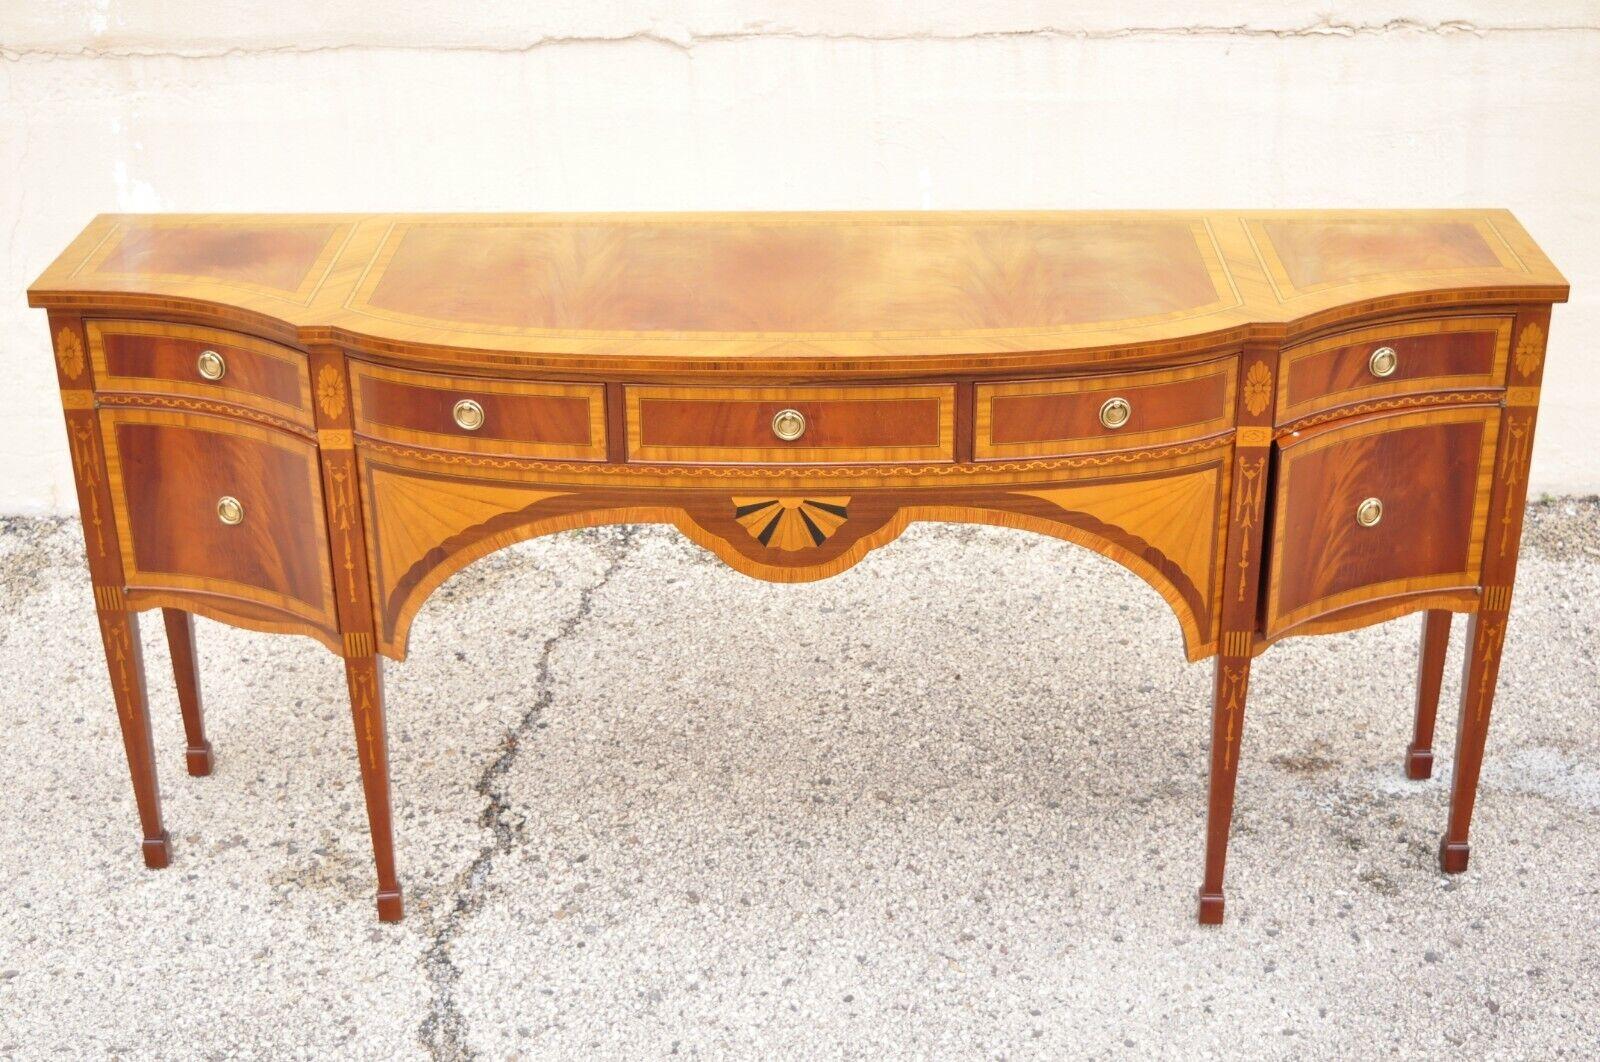 Colombo Mobili Hepplewhite Style Mahogany Satinwood Inlay Sideboard Buffet Item features pinwheel and bellflower satinwood inlay, half round demilune shape, beautiful wood grain, original stamp, 5 drawers, tapered legs, solid brass hardware, quality